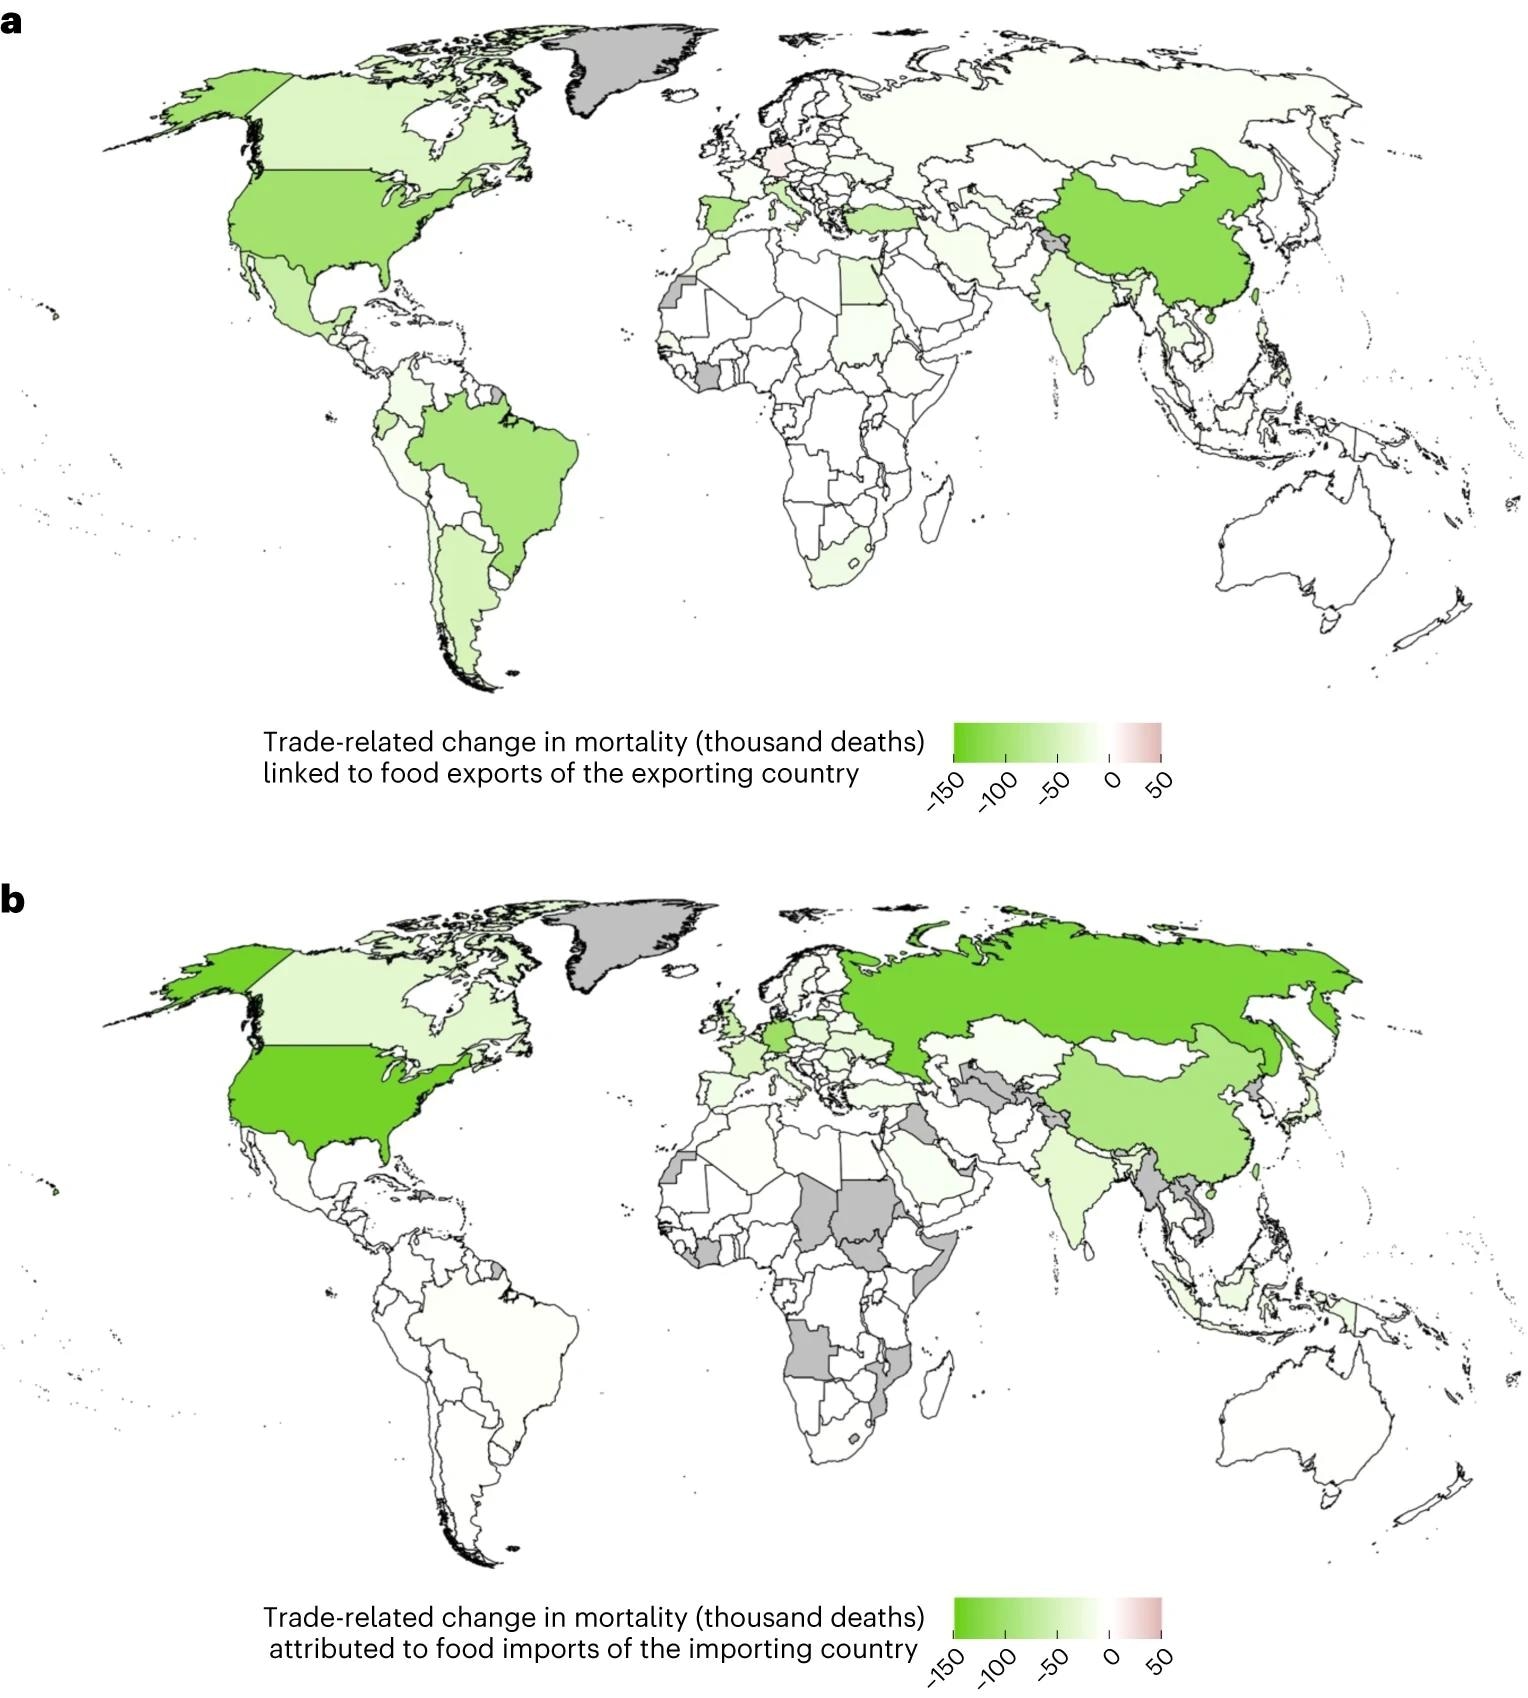 Exporters and importers of dietary risks, measured in changes in mortality. a,b, Changes in mortality occur and are estimated in the importing region (b) and traced back to the exporting region (a) to highlight the connection via trade.